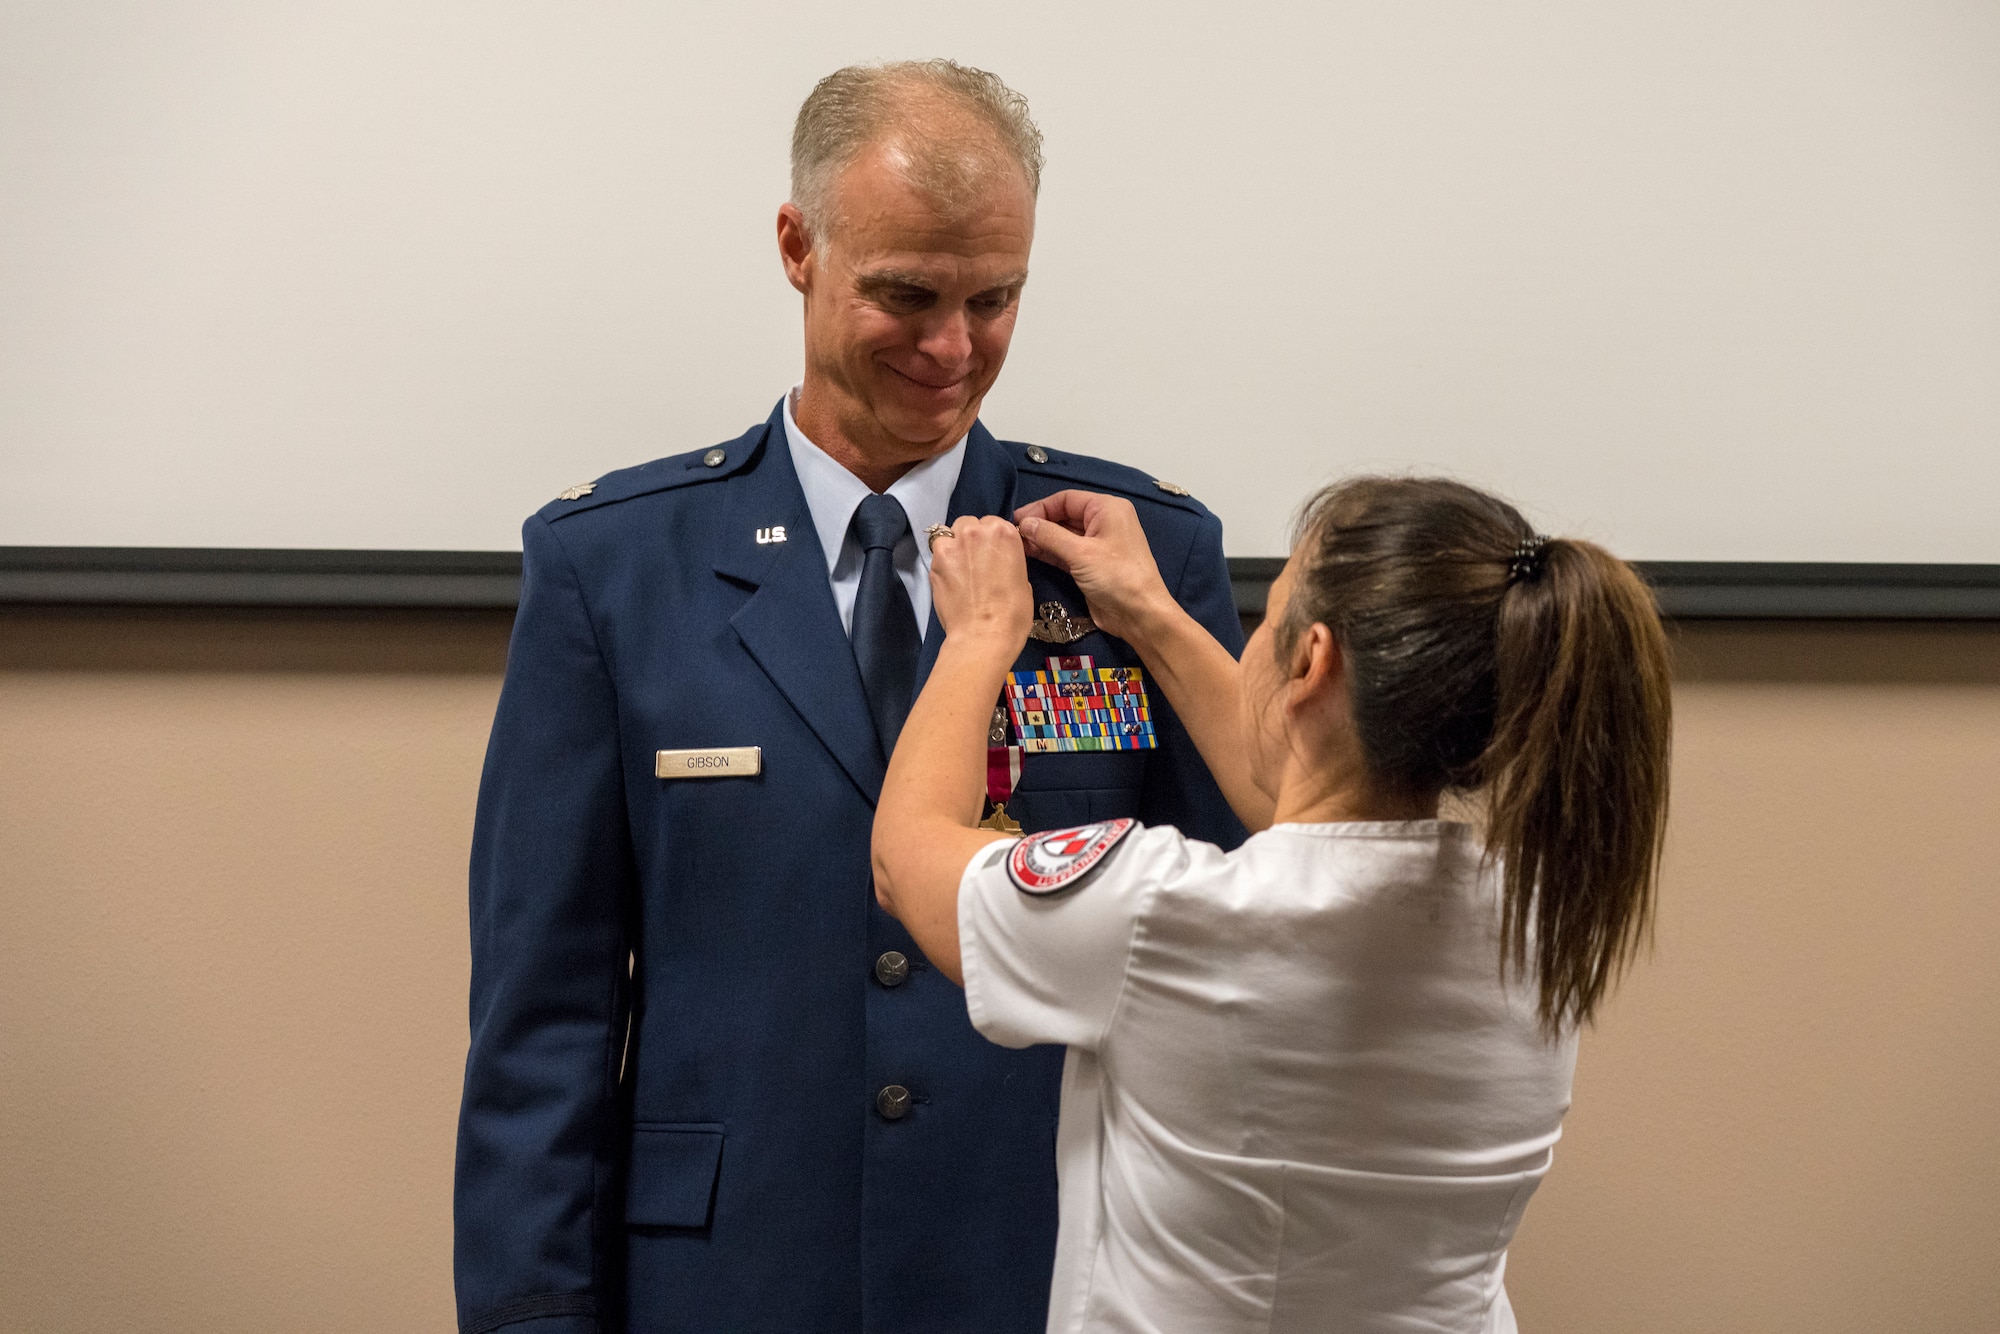 Shelly Gibson pins the U.S. Air Force retirement pin on her husband Lt. Col. Keith Gibson, 403rd Wing Operations Group deputy commander, during his retirement ceremony Aug. 3, 2019 at Keesler Air Force Base, Mississippi. Gibson completed his Air Force career with 29 years of service. (U.S. Air Force photo by Tech. Sgt. Christopher Carranza)